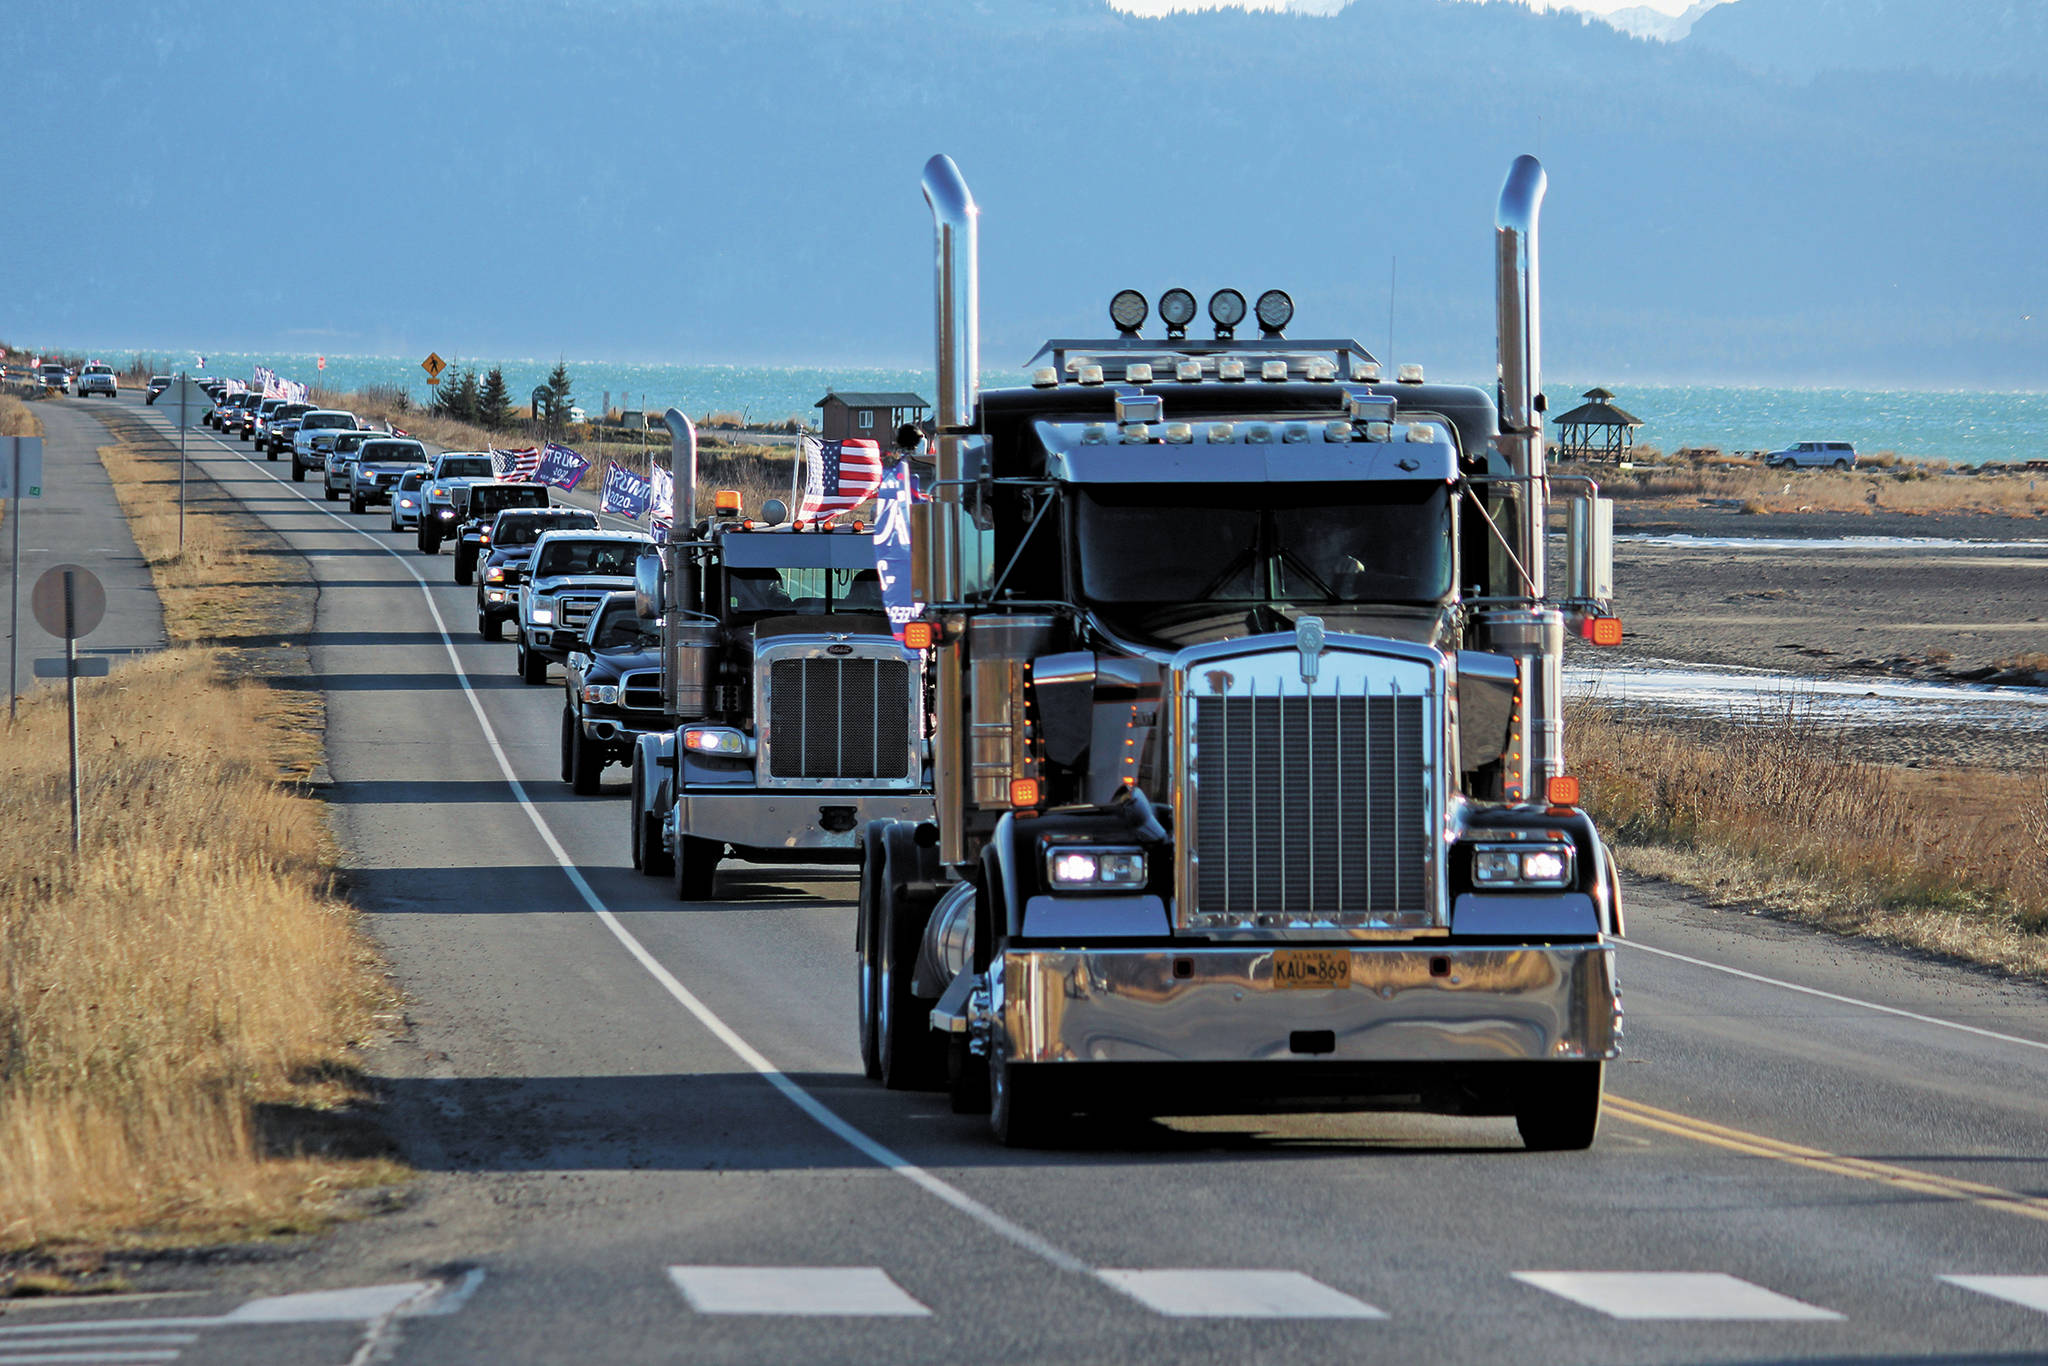 Participants in a vehicle parade to support President Donald Trump make their way off the Homer Spit on Sunday, Nov. 1, 2020 in Homer, Alaska. Organized by a Homer resident, the event was not part of similar parades that took place across the state and country over the weekend. (Photo by Megan Pacer/Homer News)